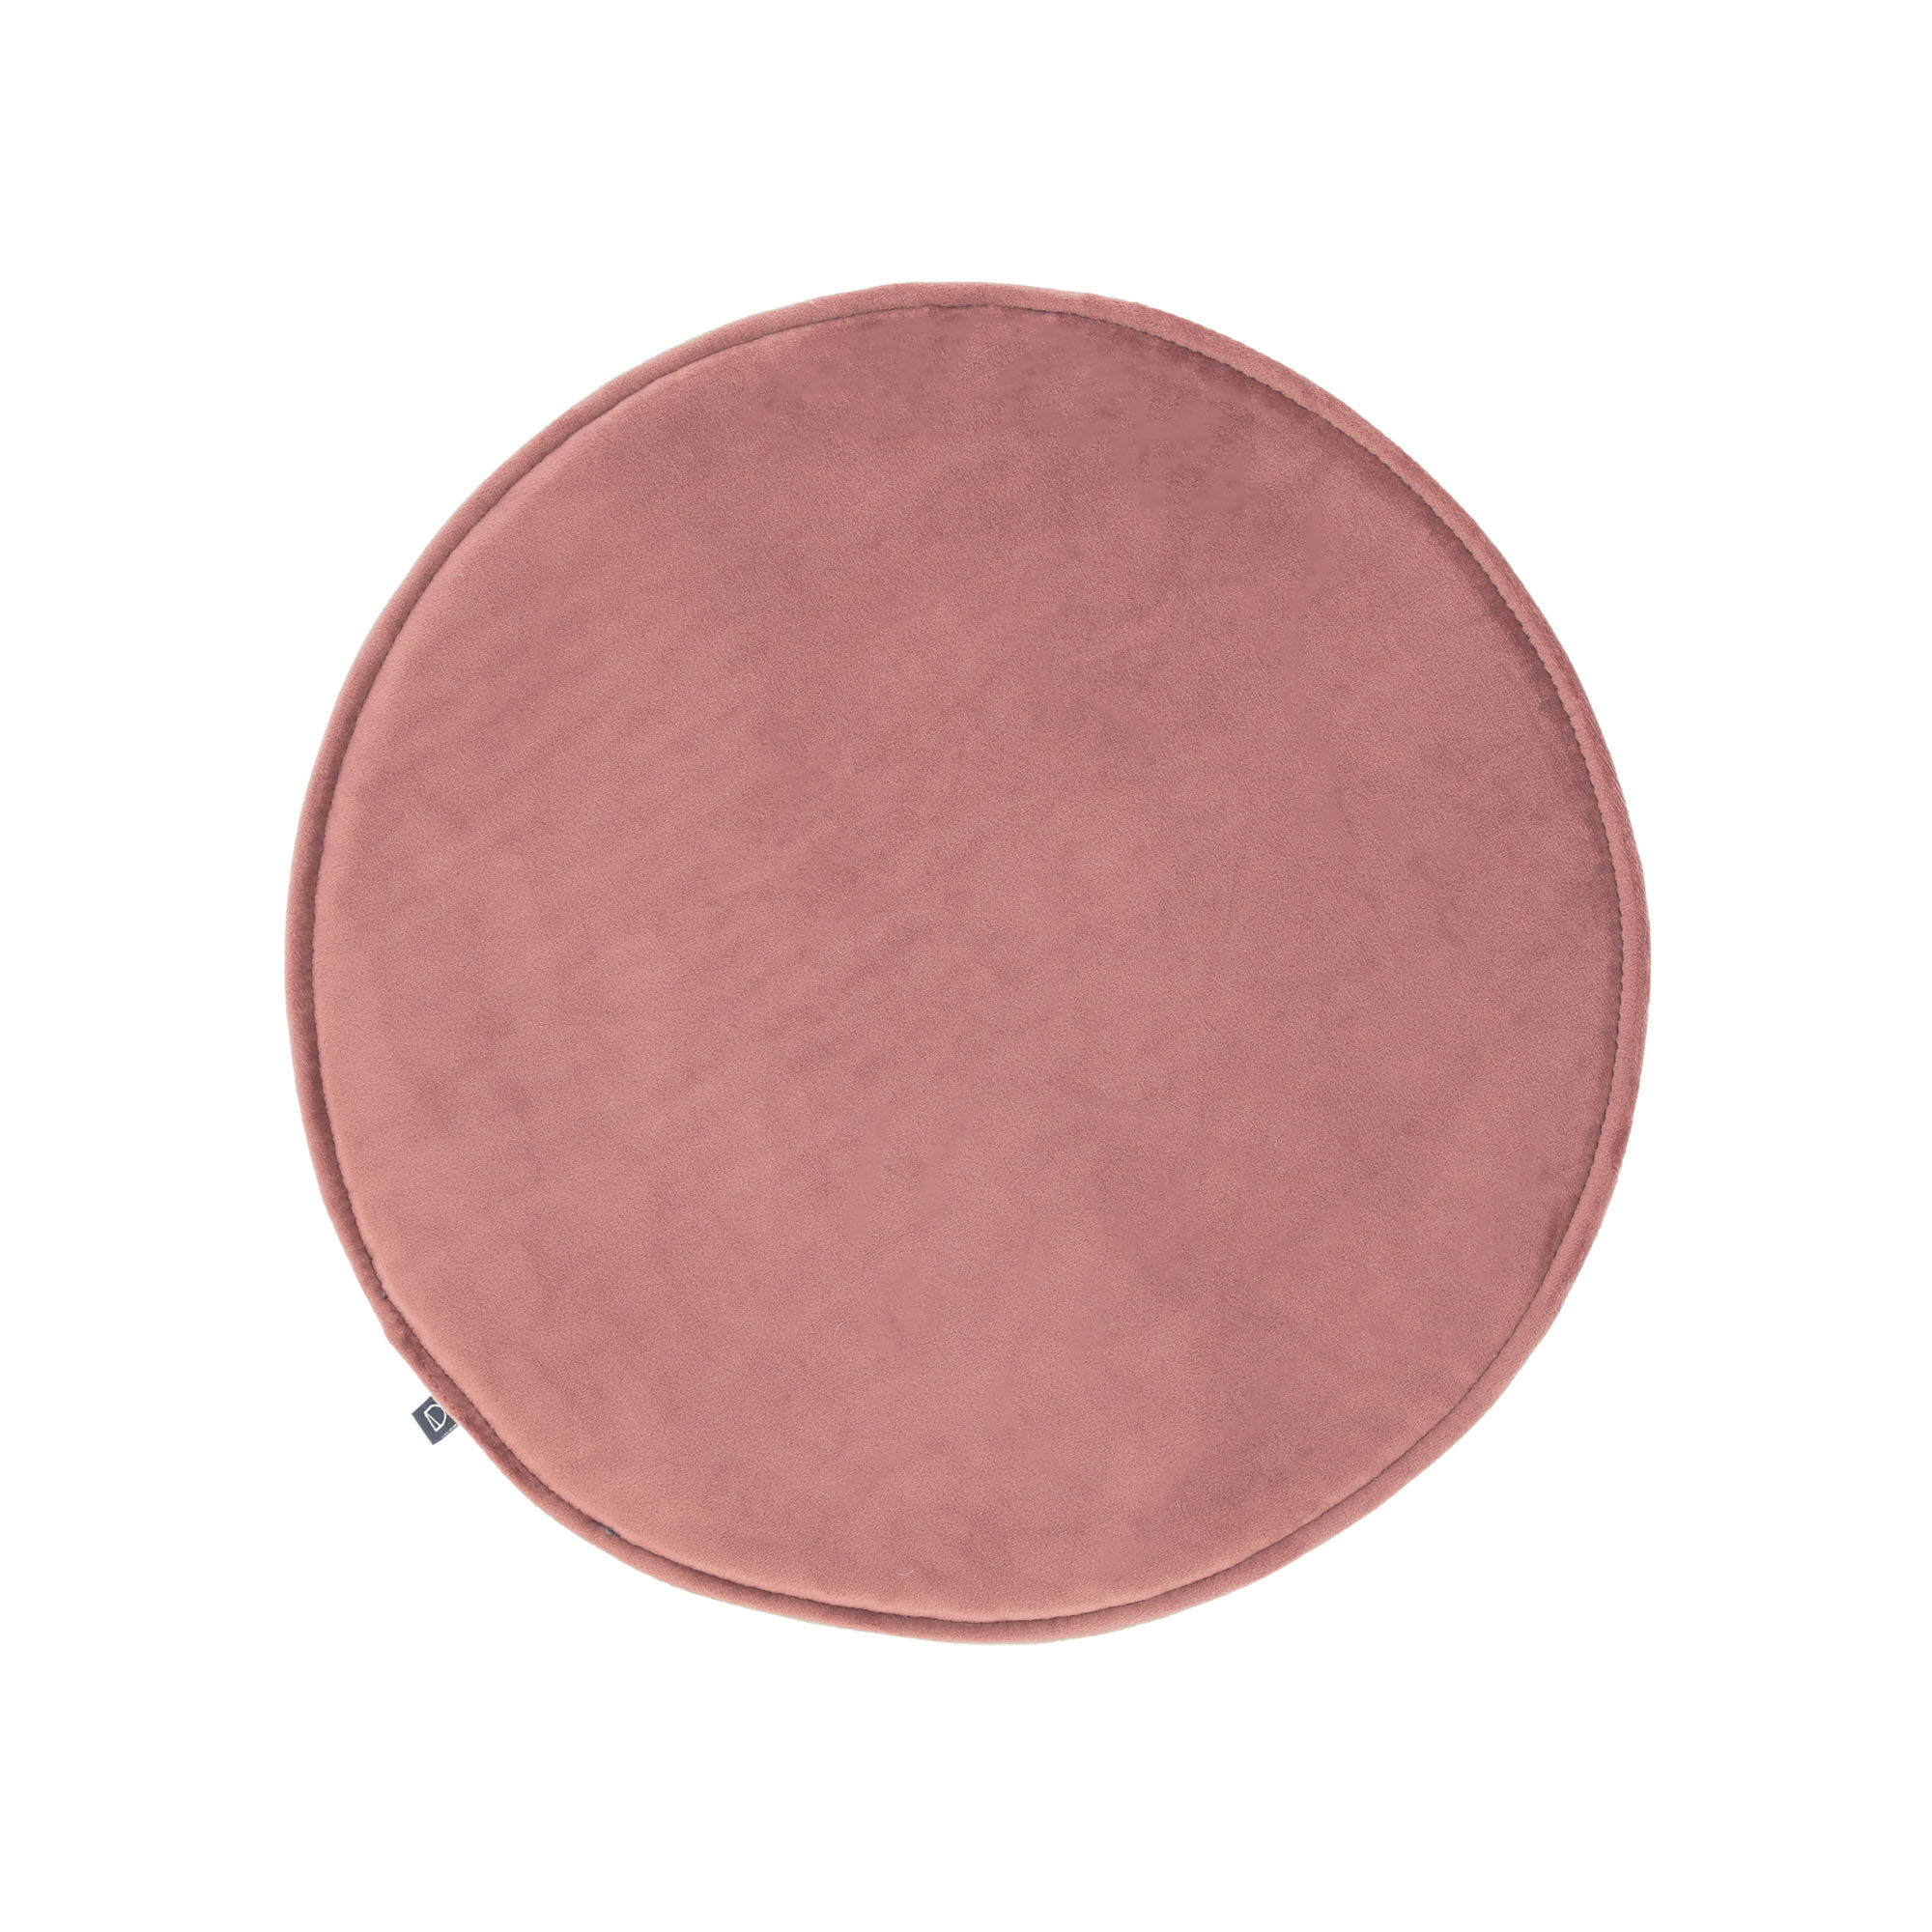 Kave Home Rimca round velvet chair cushion in pink, 35 cm